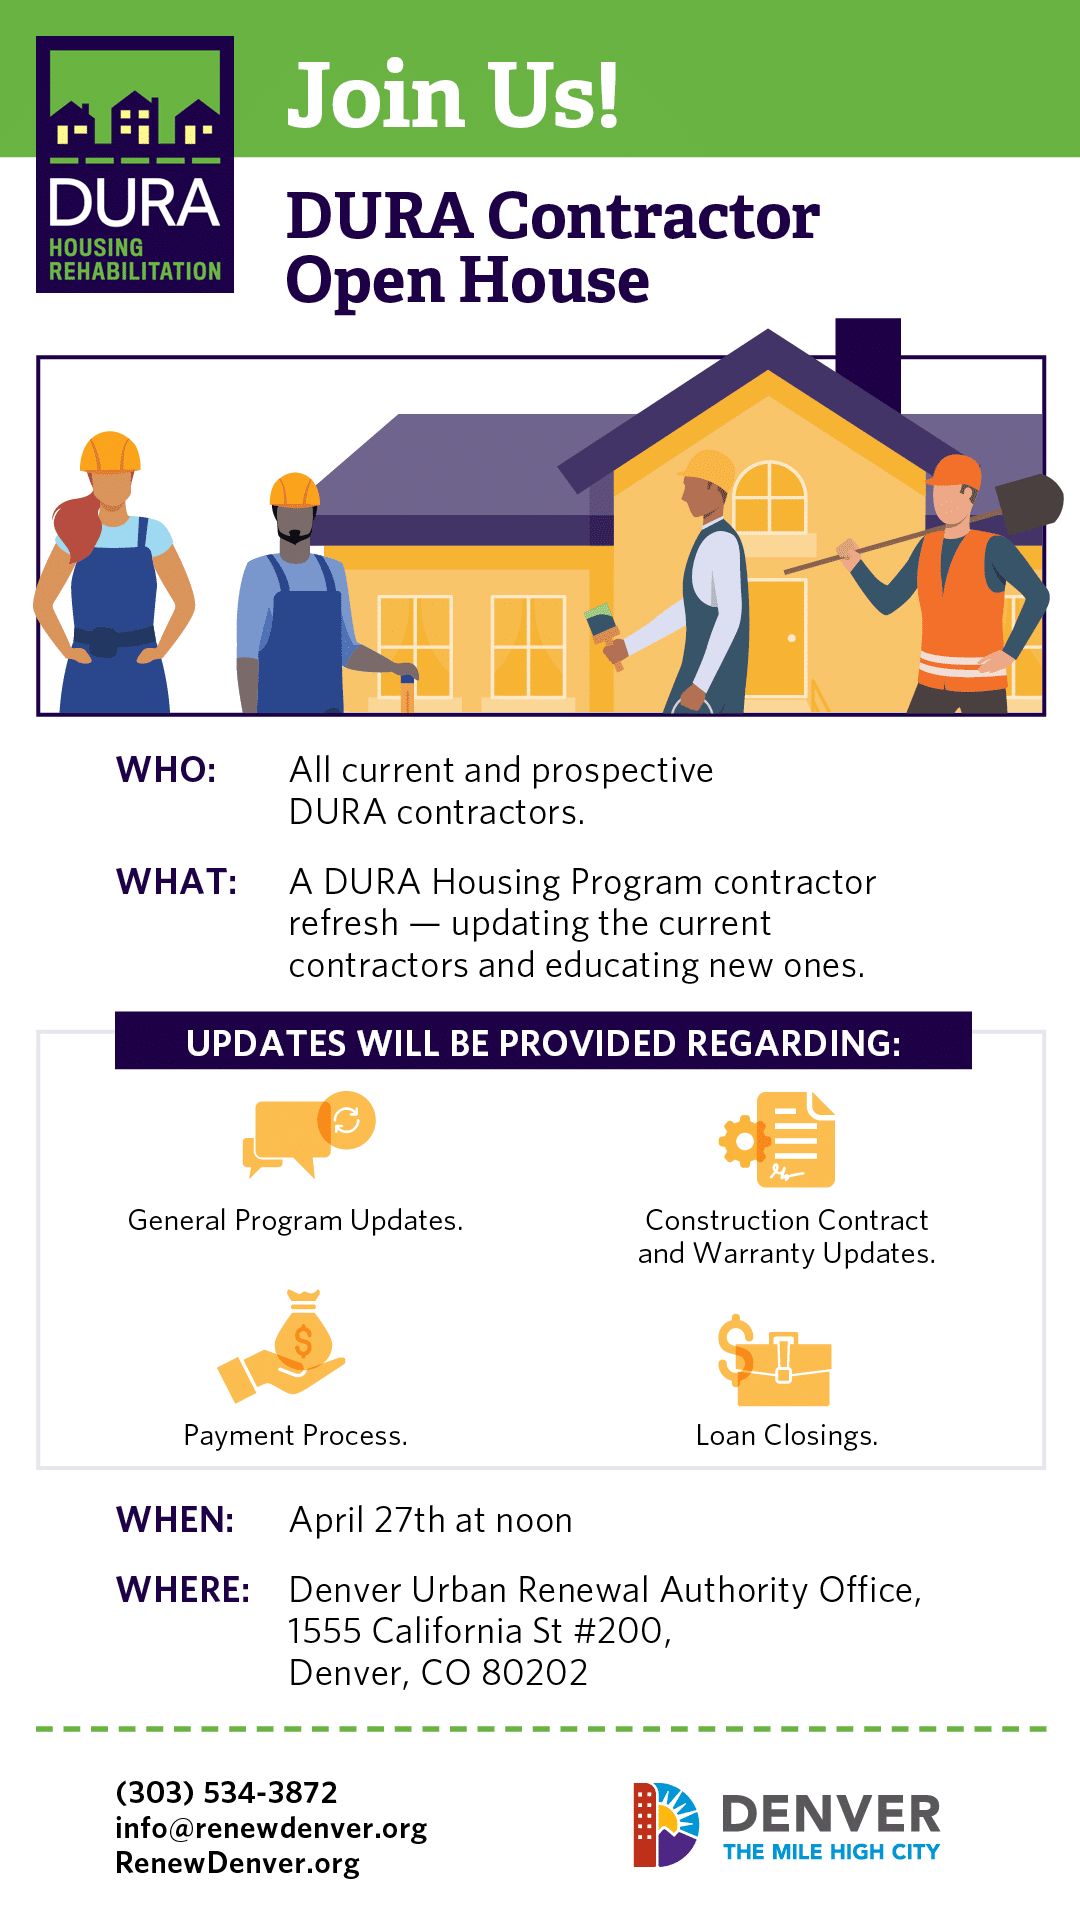 Open house promotional flyer. Includes information described in webpost with graphical representations of contractors working on a house.